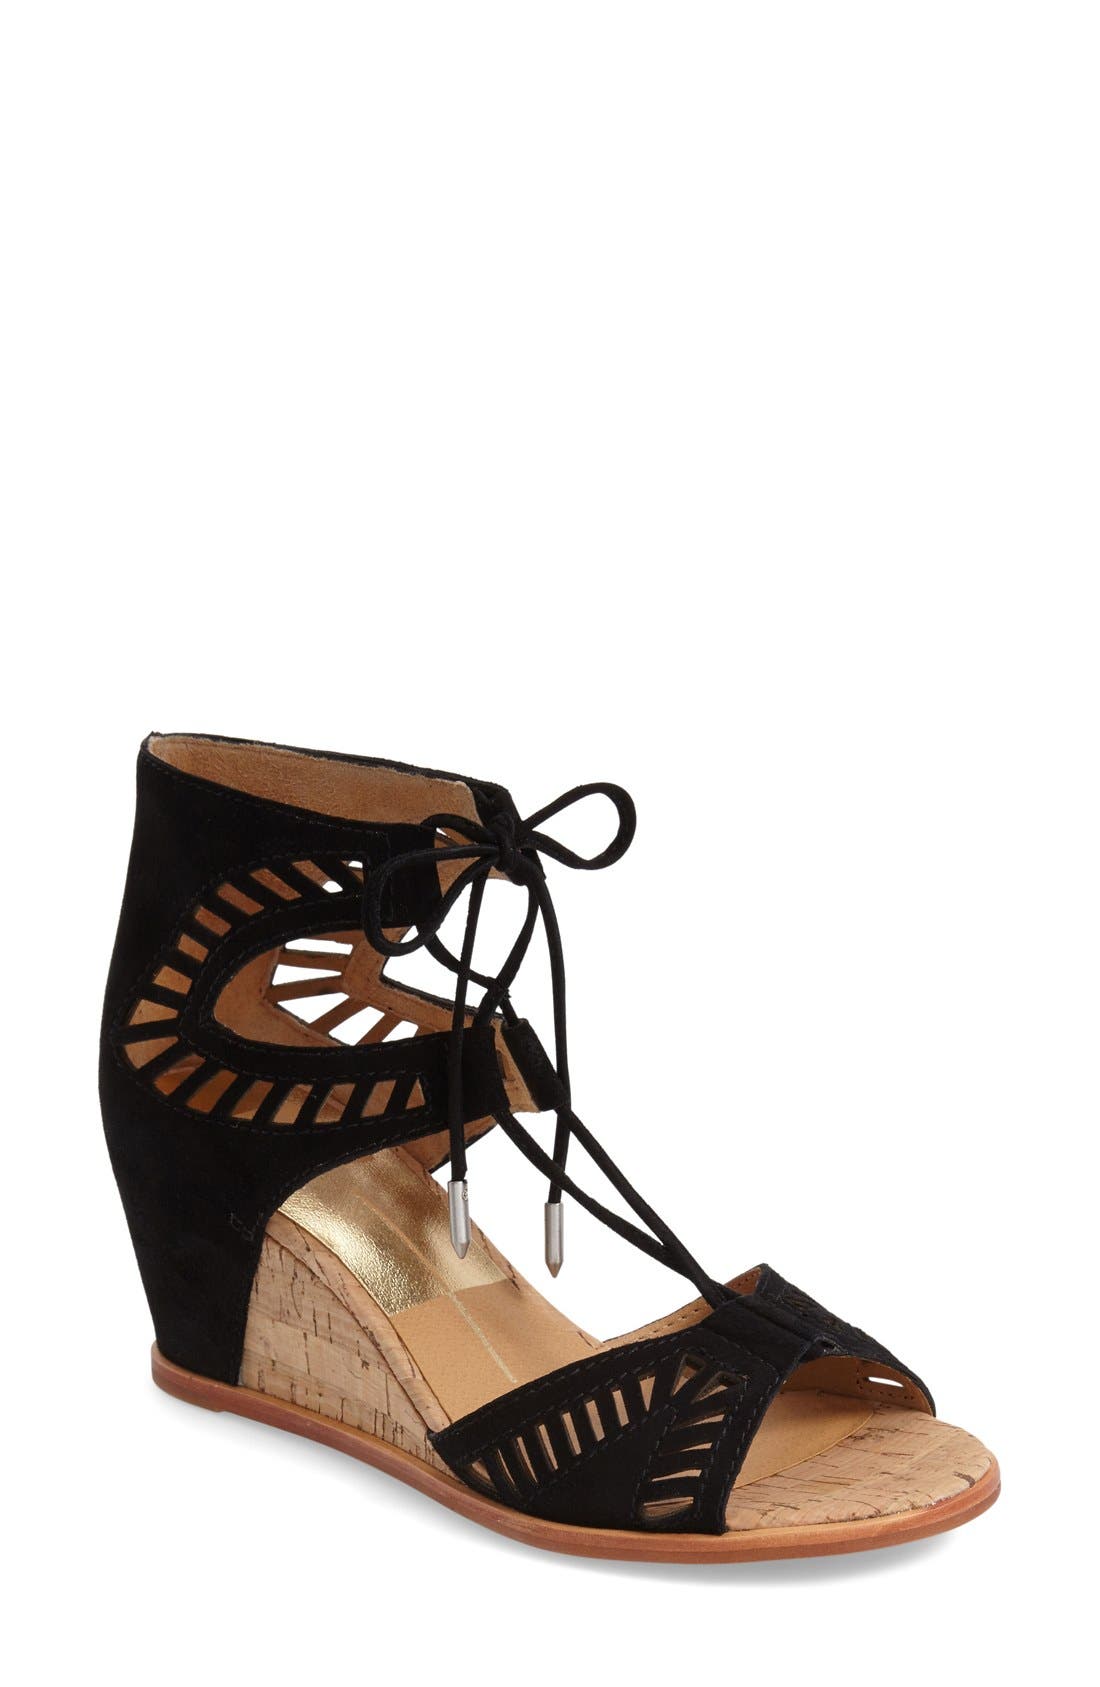 Dolce Vita 'Linsey' Lace-Up Wedge 